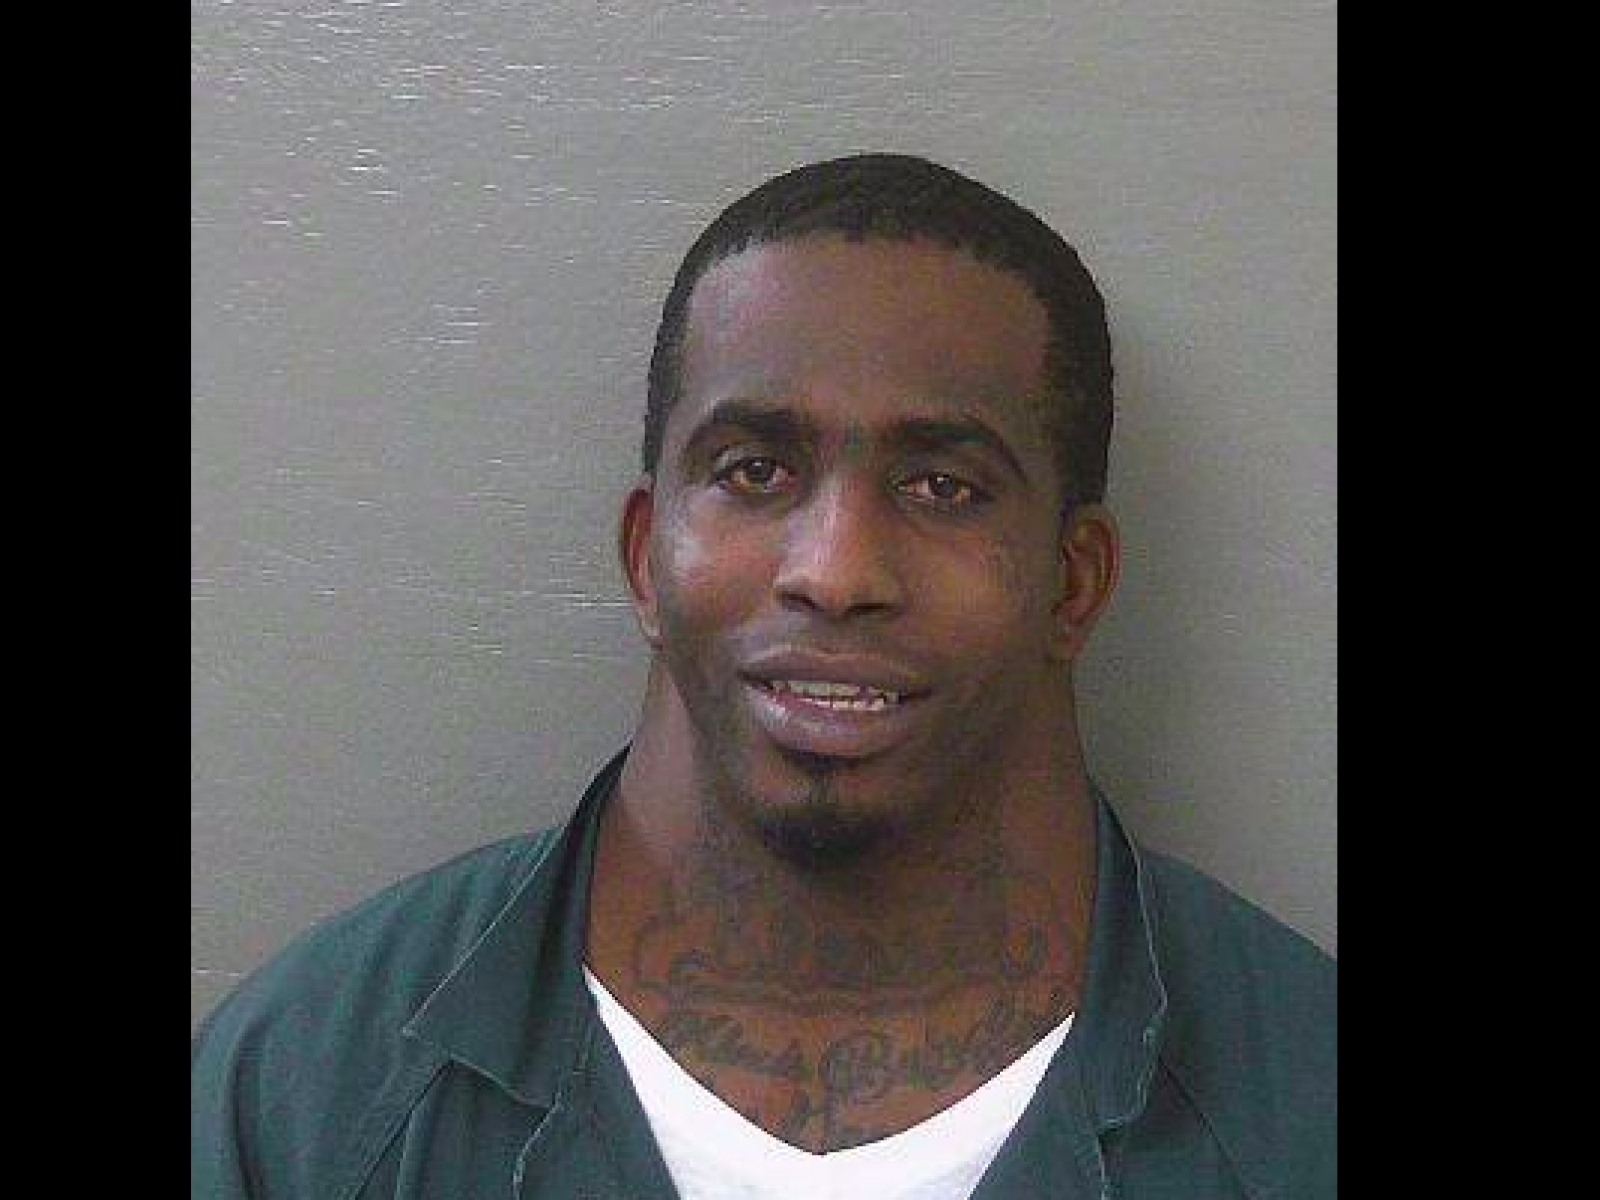 neck-guy-charles-dion-mcdowell.png